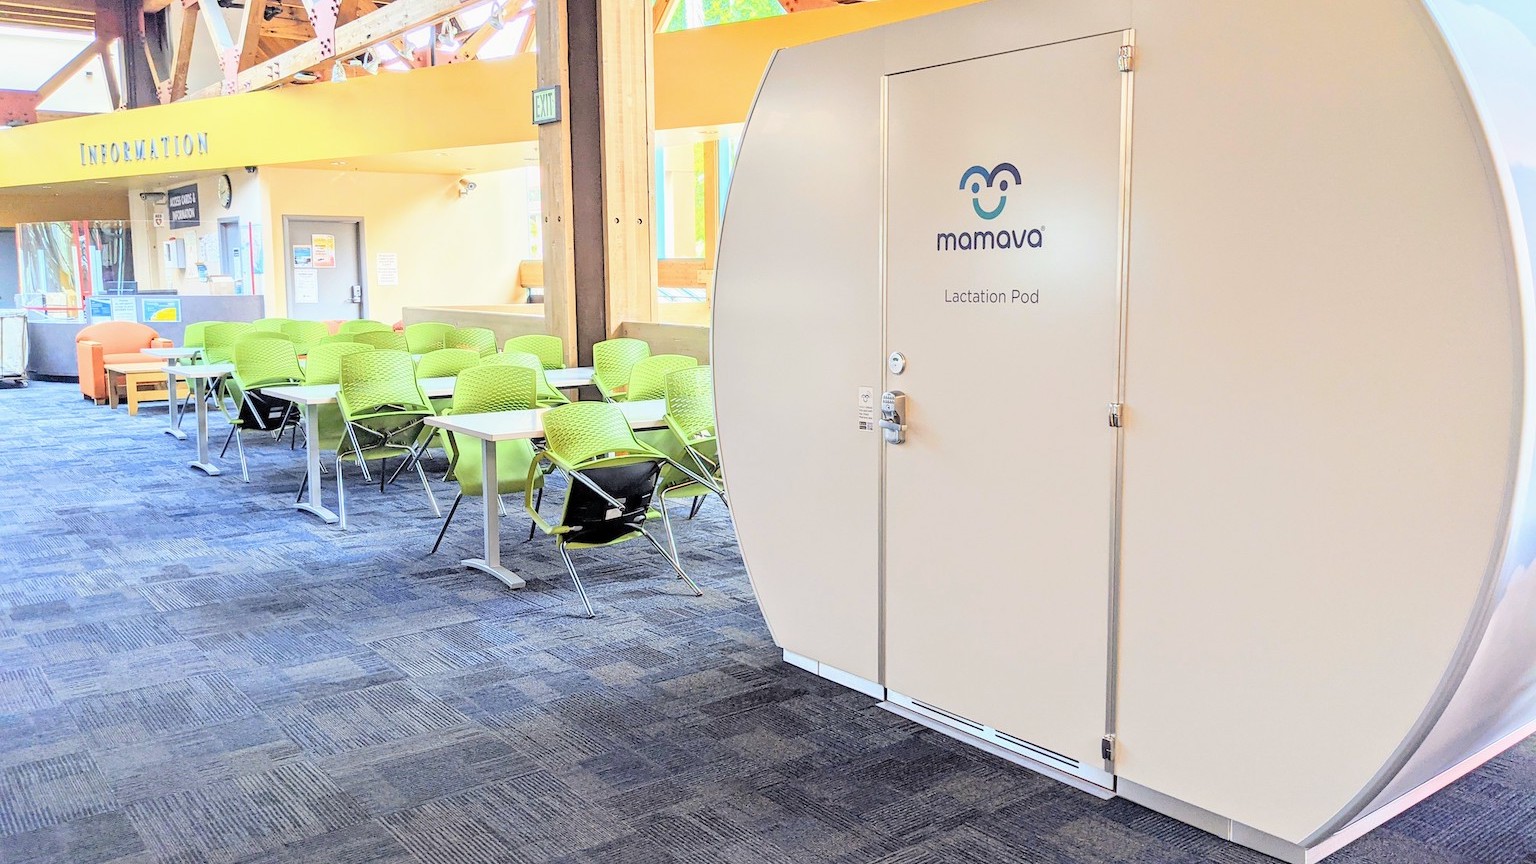 Picture of Mamava Lactation Pod located on the main floor of the UCEN next to the information desk.